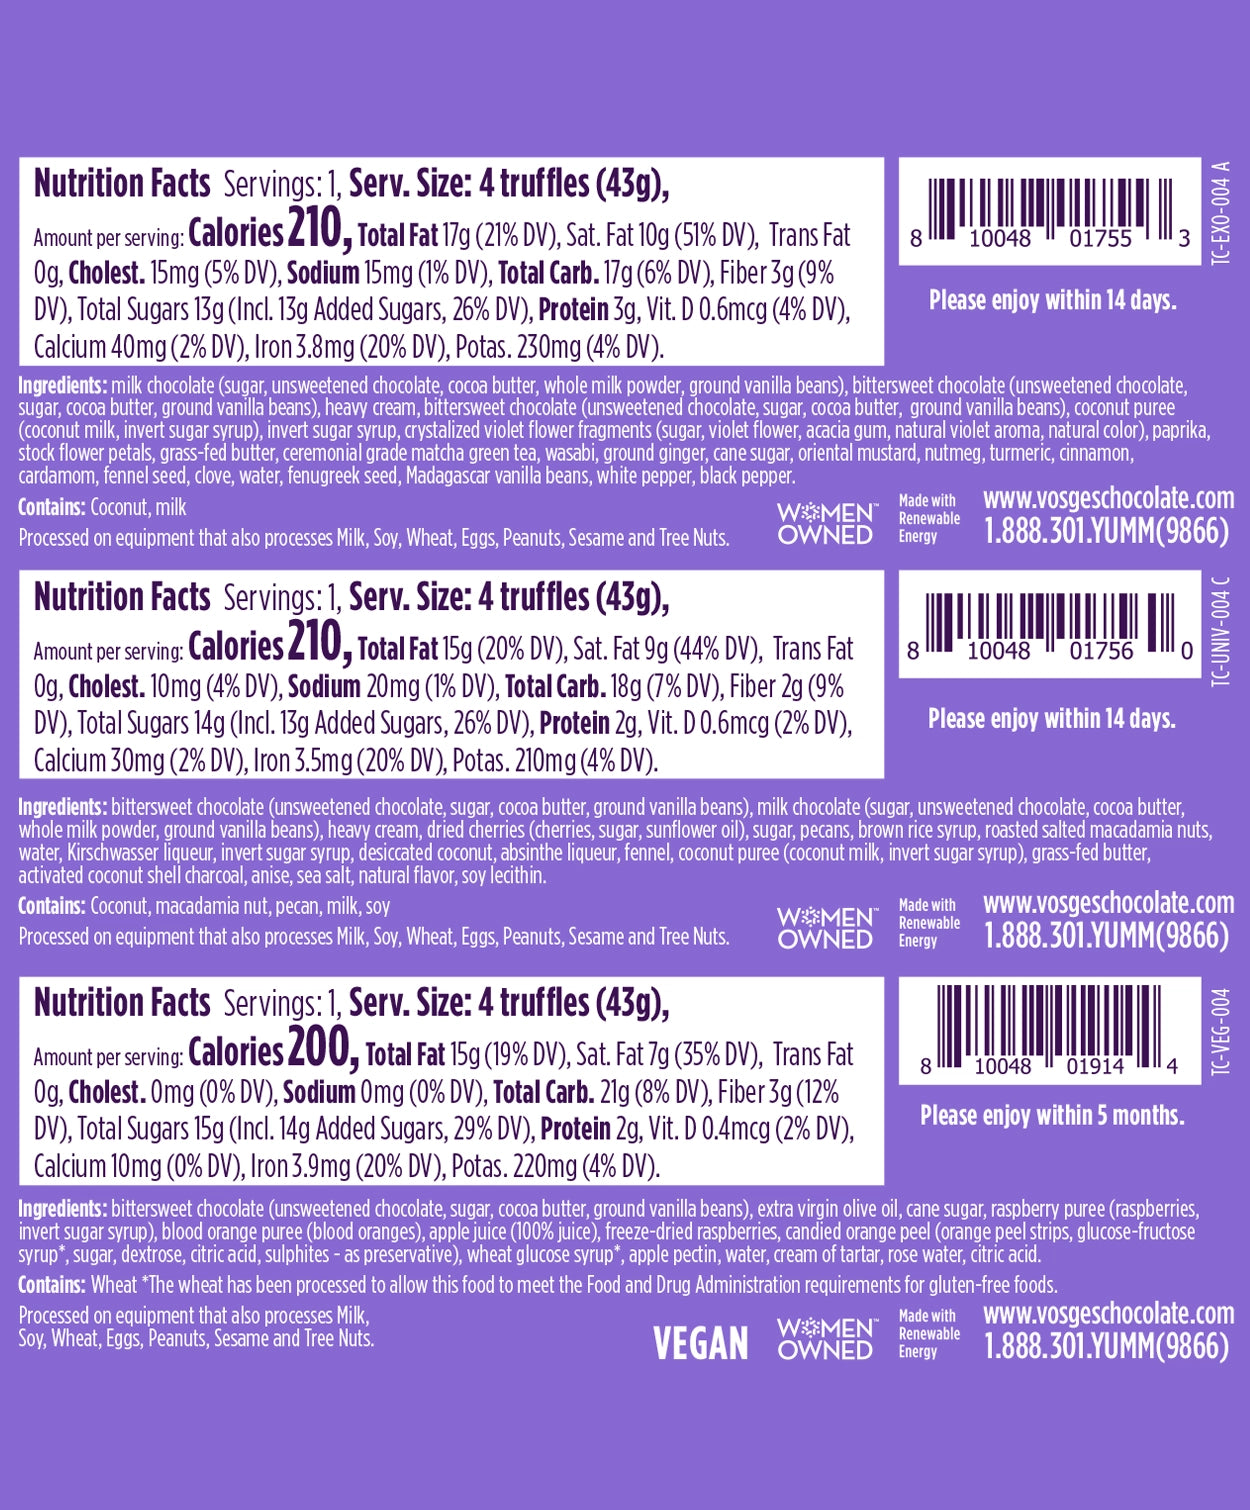 Nutrition Facts and Ingredients of Vosges Haut-Chocolat Exotic, Traditional and Vegan four piece Chocolate Truffle Collection printed in white san-serif font on a dark purple background.